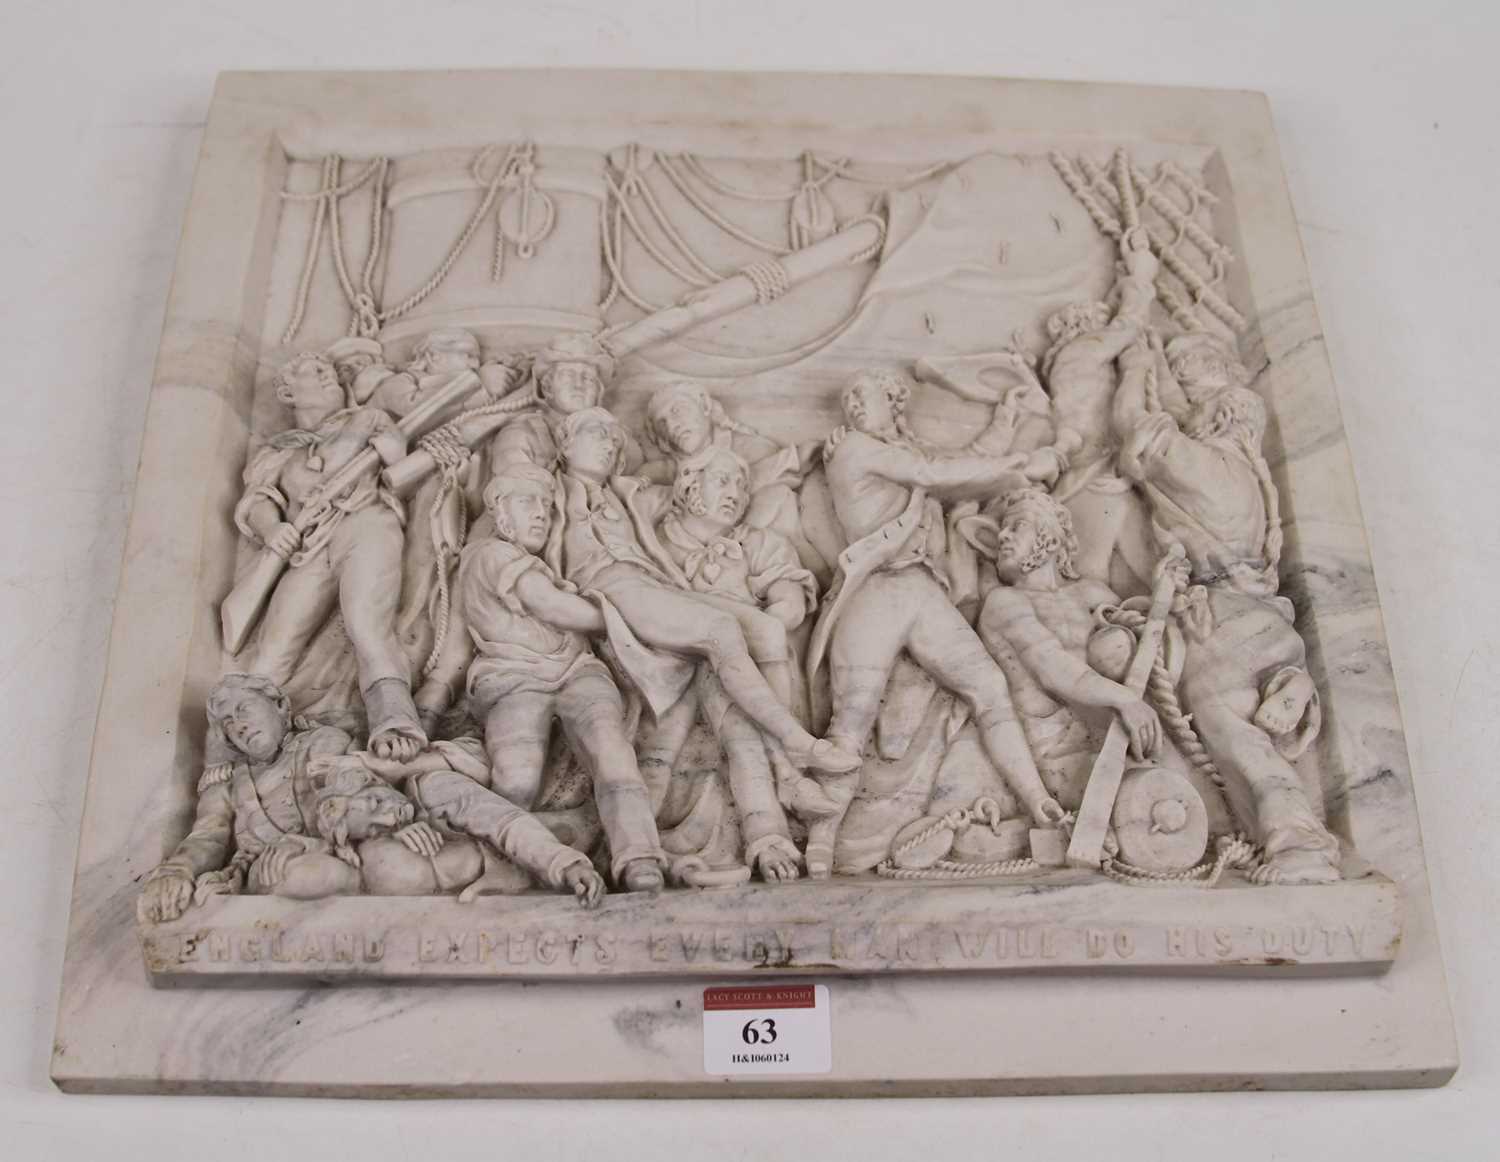 A simulated marble plaque to commemorate the Battle of Trafalgar, moulded in high relief with a